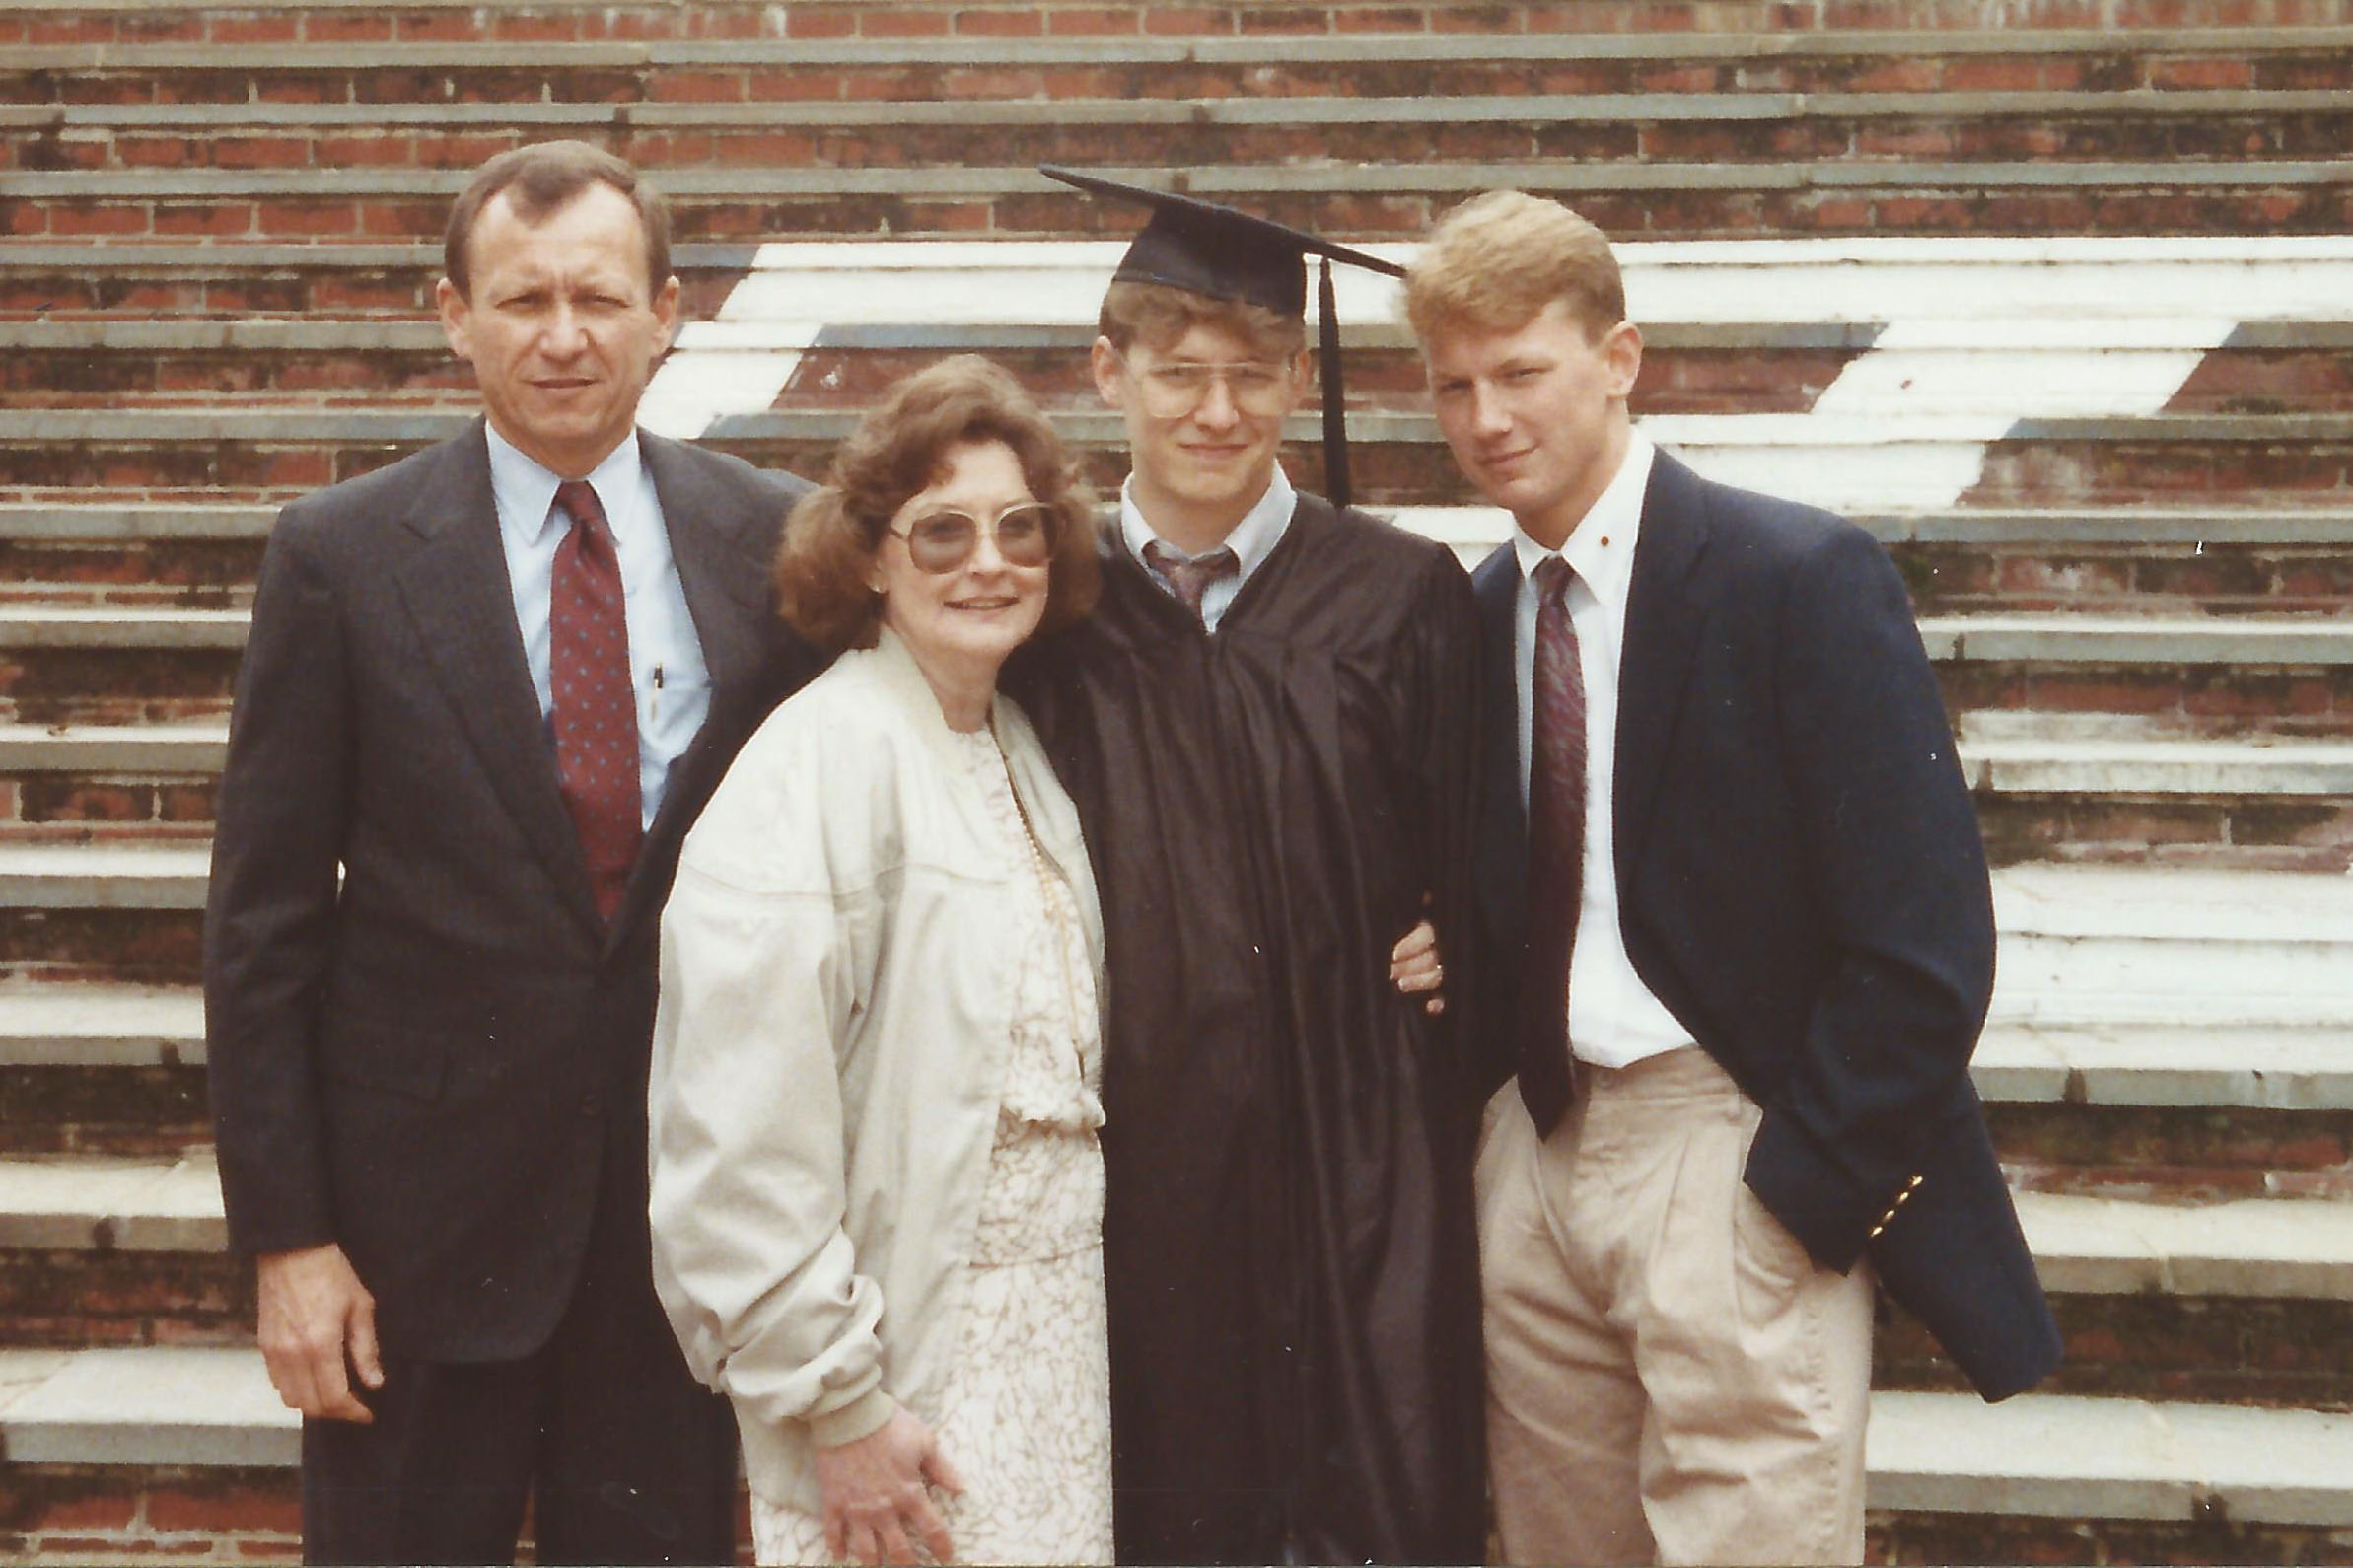 In 1991, Seth Folsom completed his first year and his brother Ben graduated. (Image courtesy Seth Folsom.)